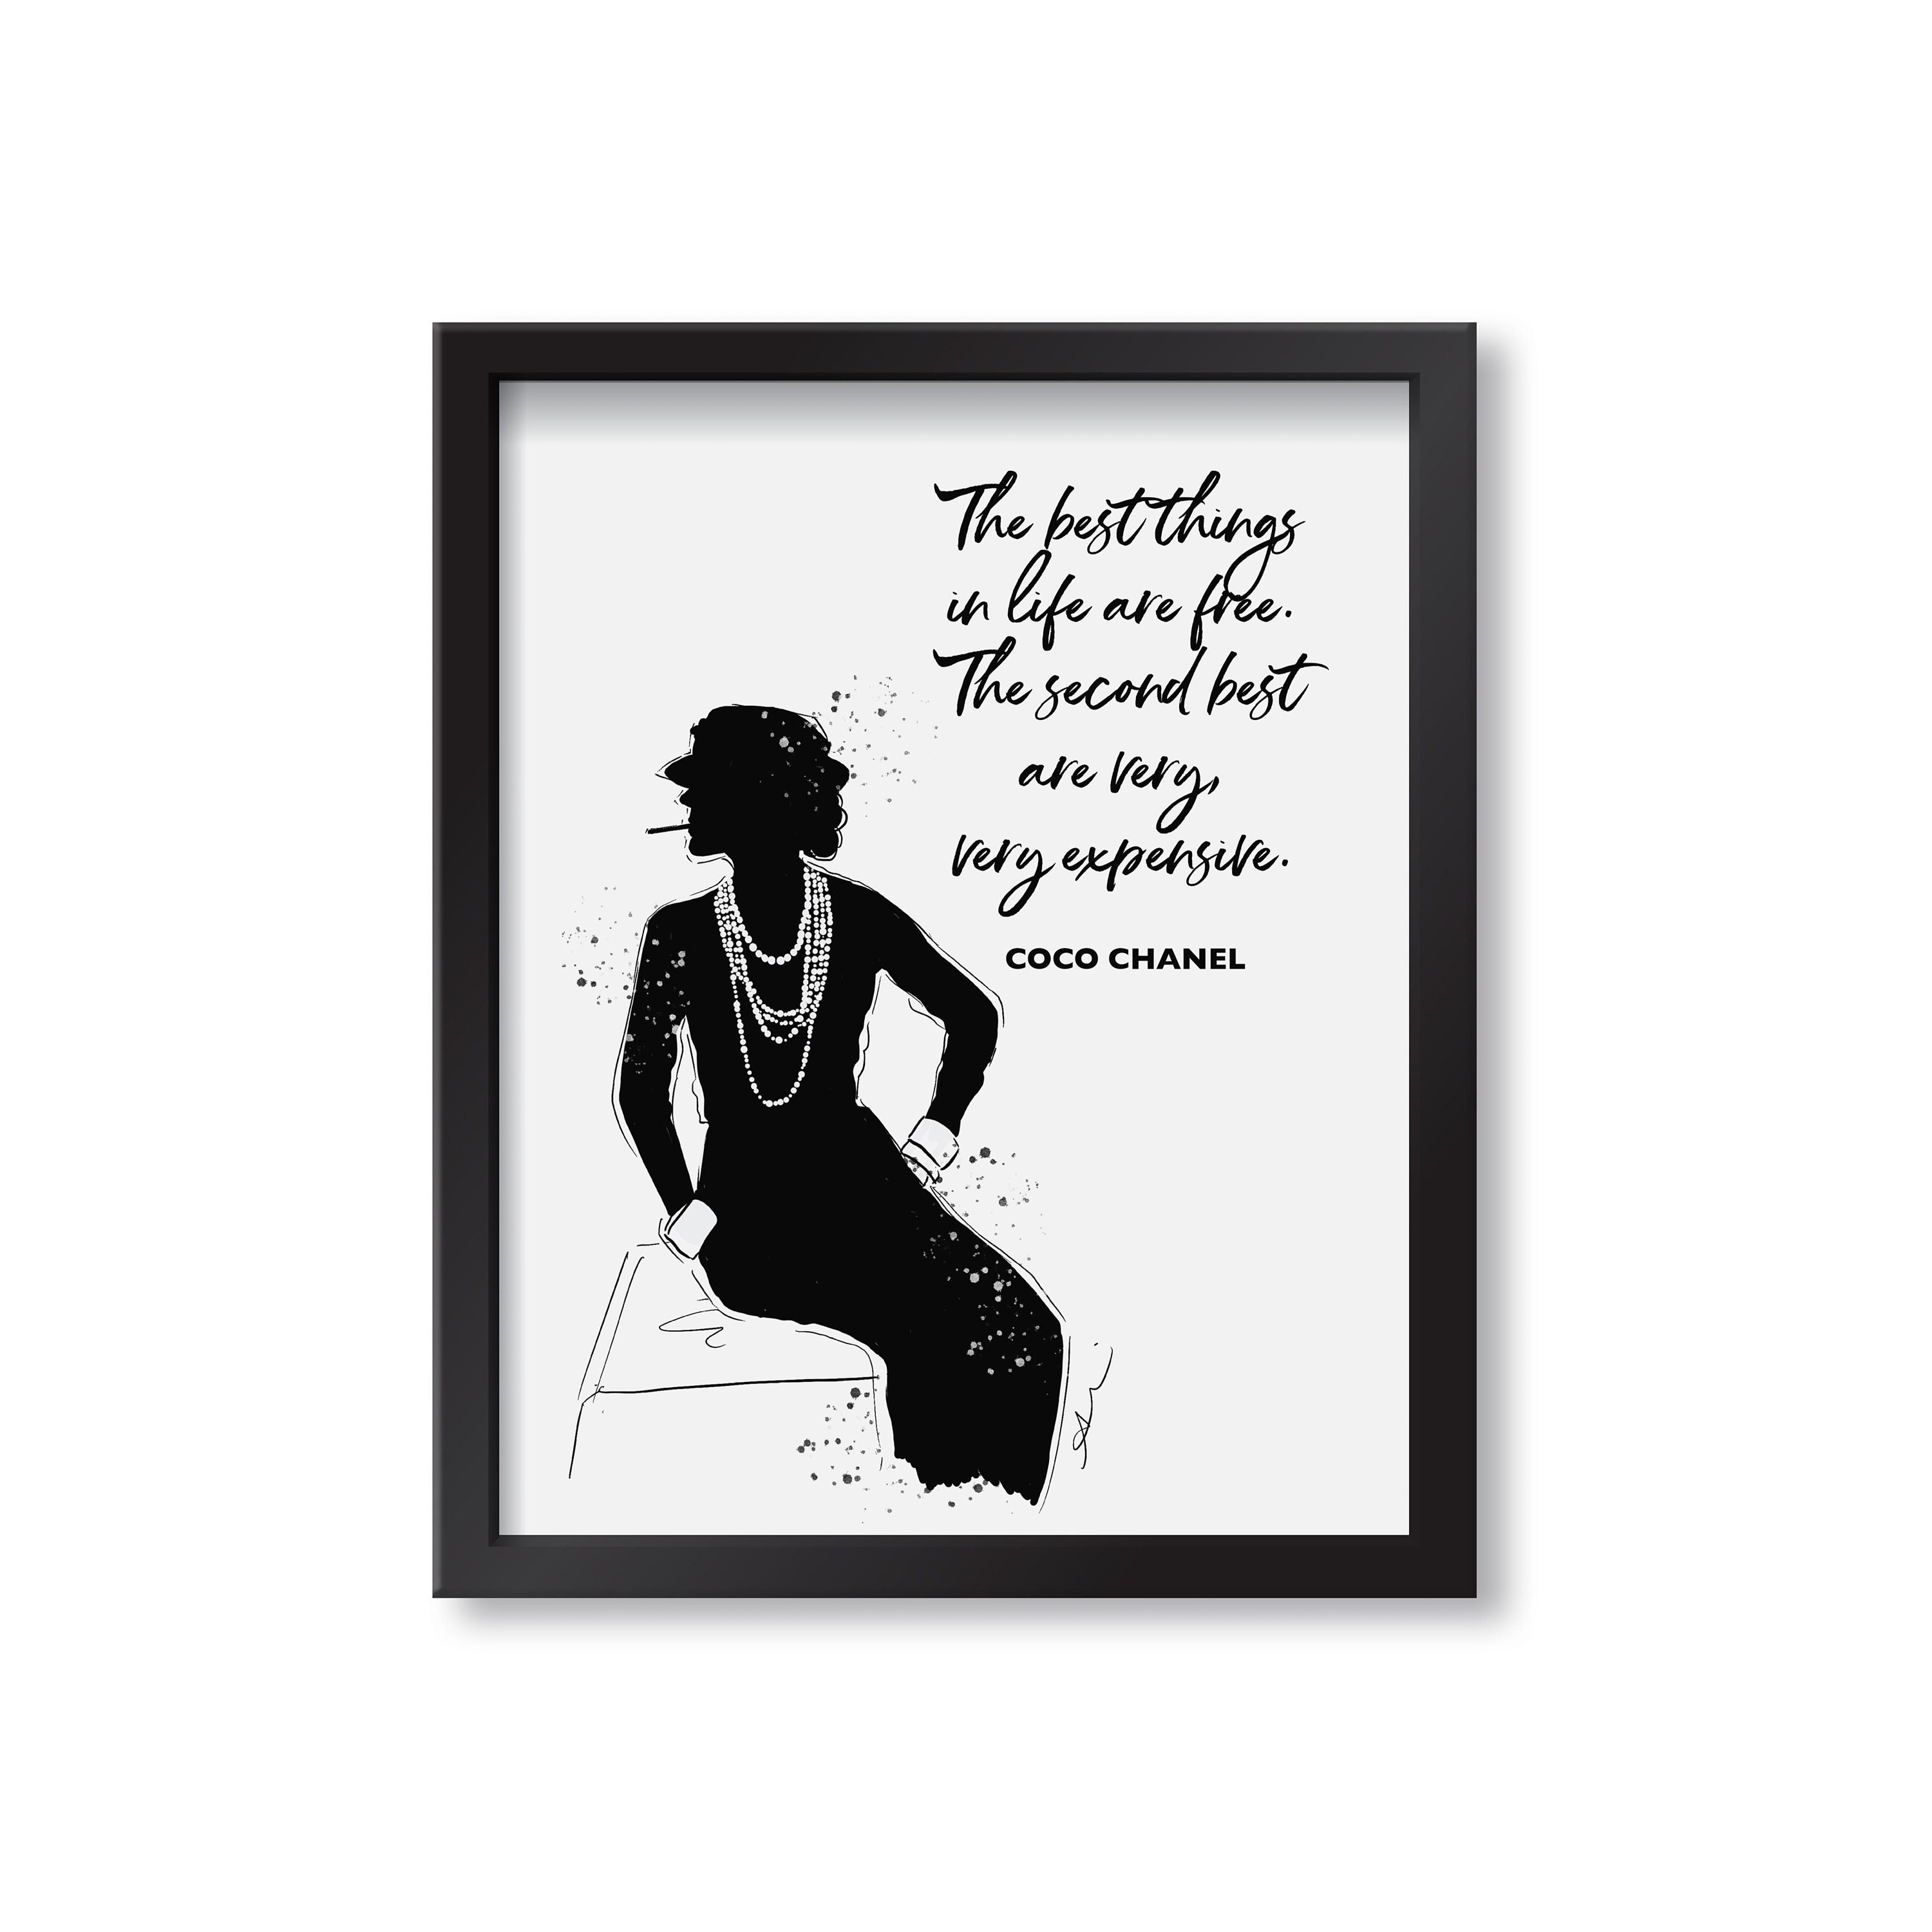  Coco Chanel Vintage Portrait Poster - Image by Shutterstock :  Everything Else